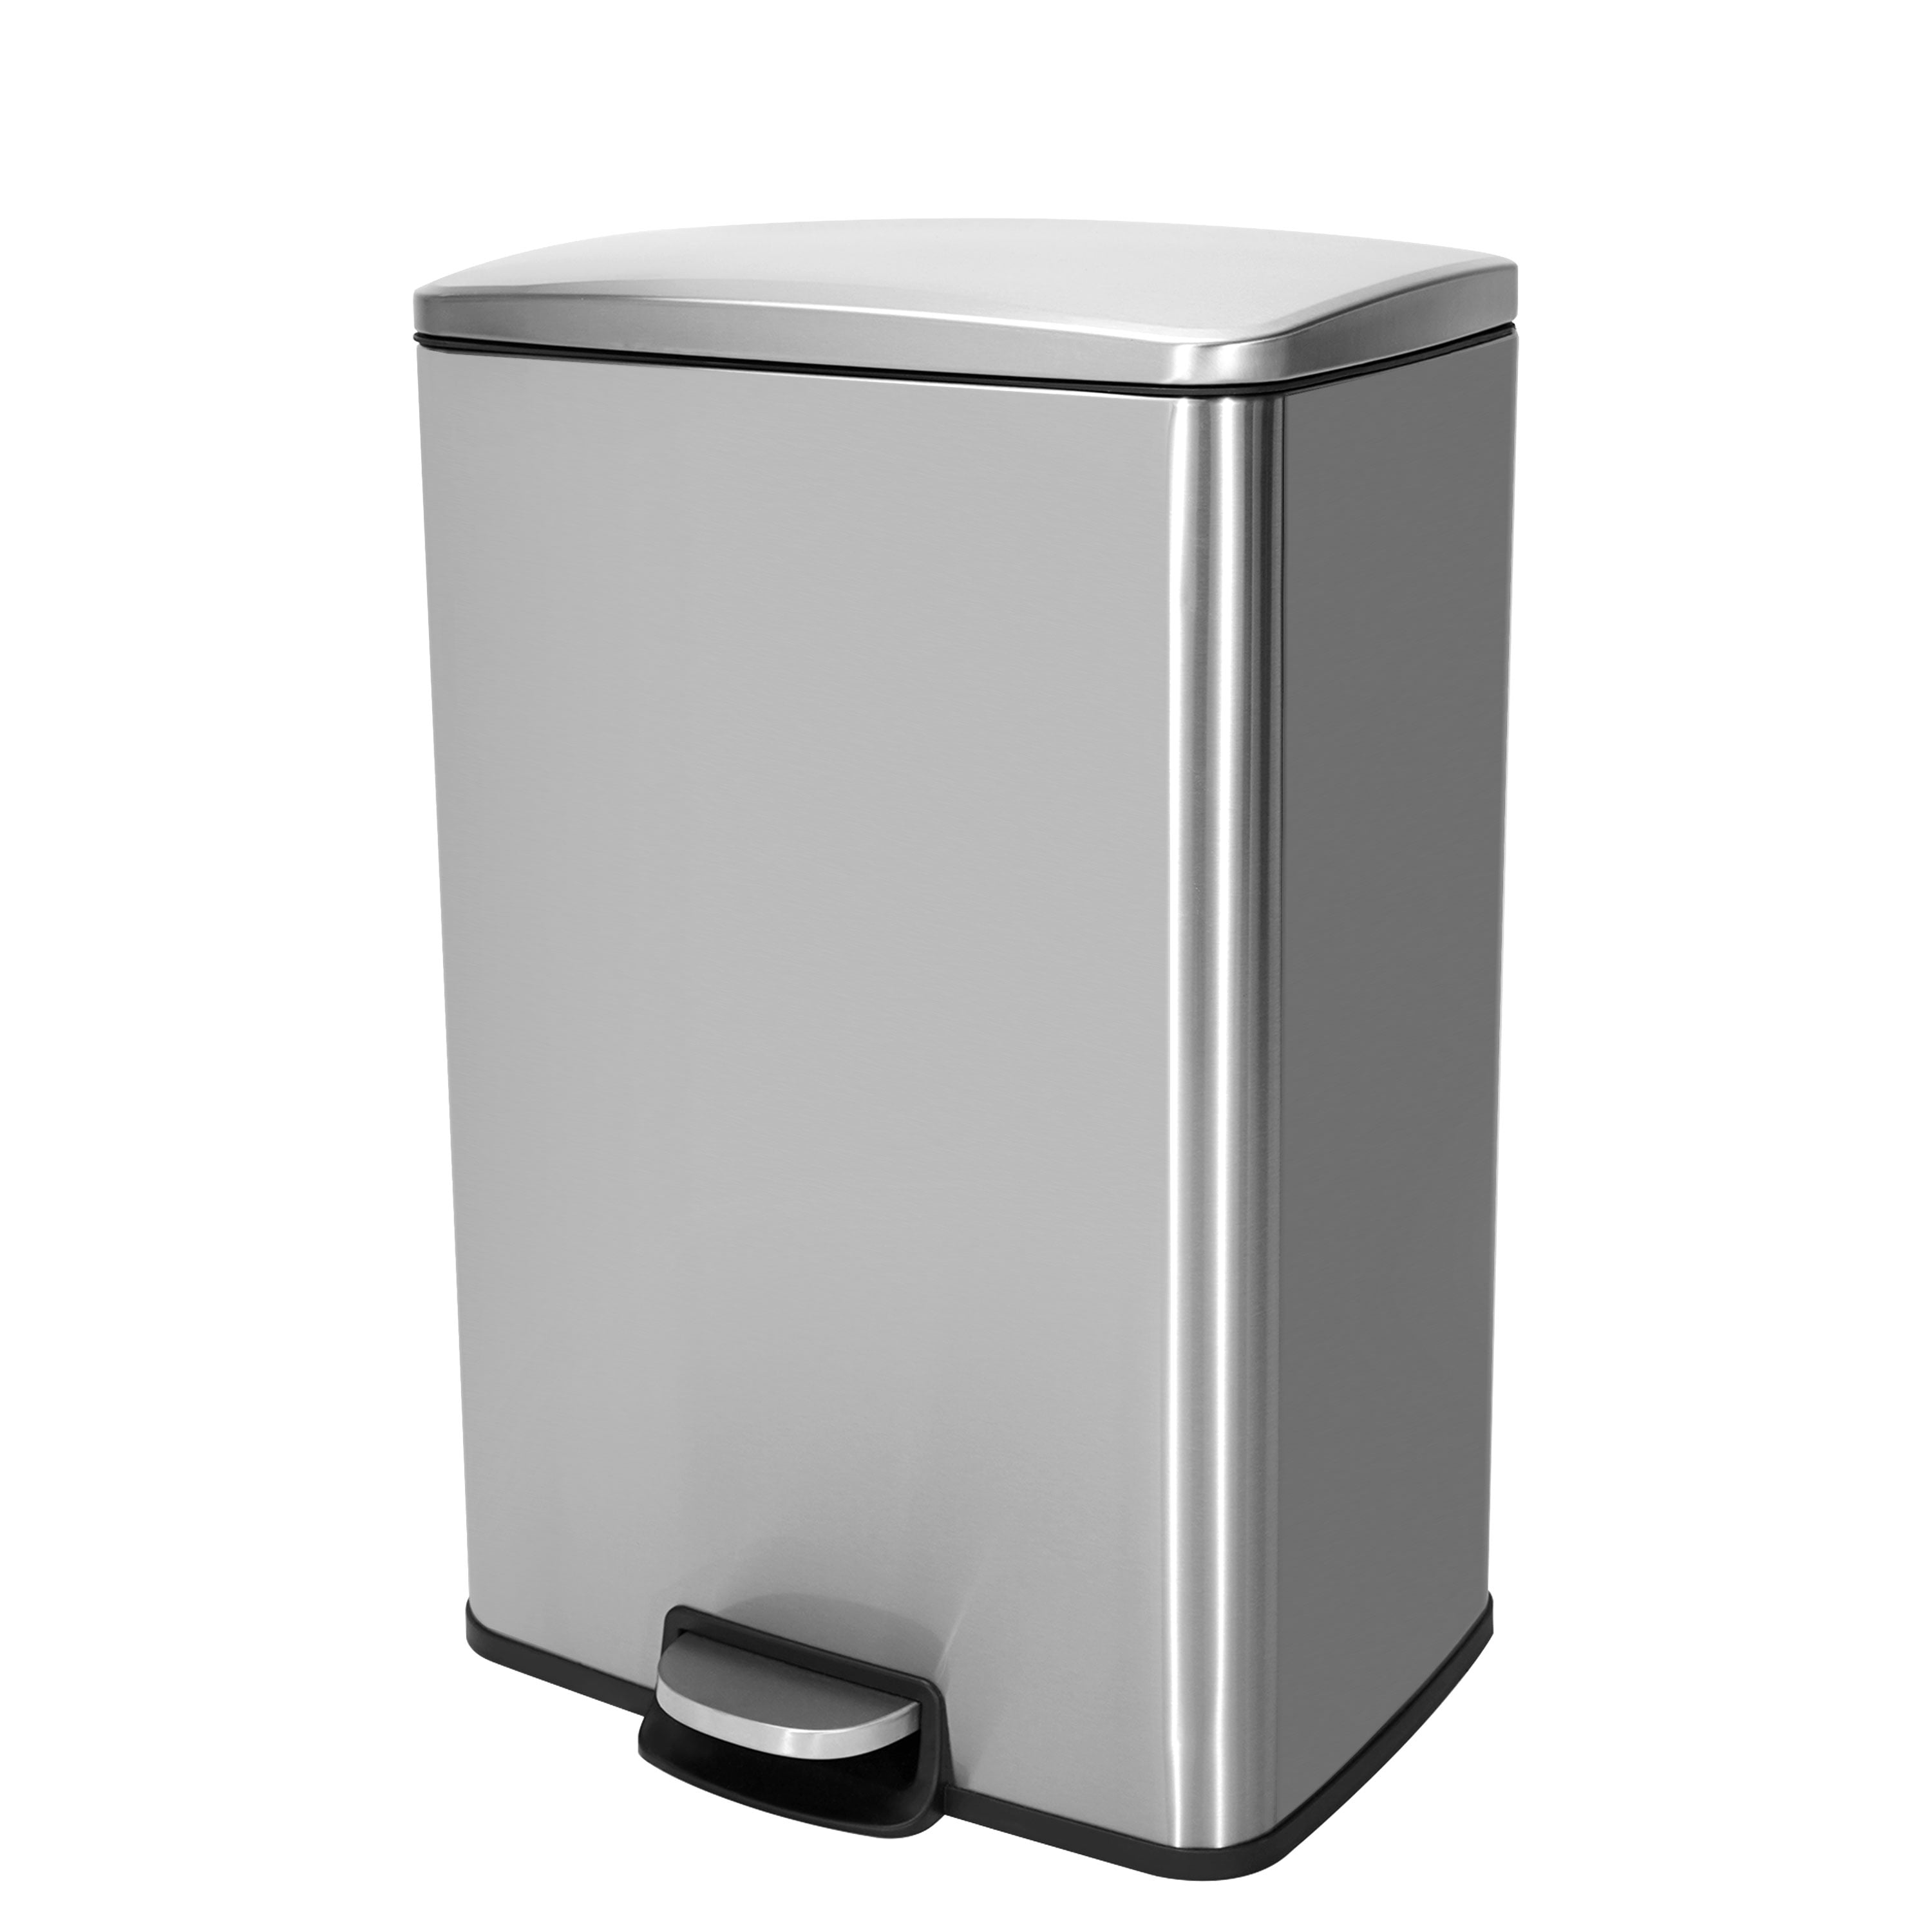 Innovaze 13 Gallon Stainless Steel Step Rectangular Kitchen Trash Can Rectangle Stainless Steel Garbage Can